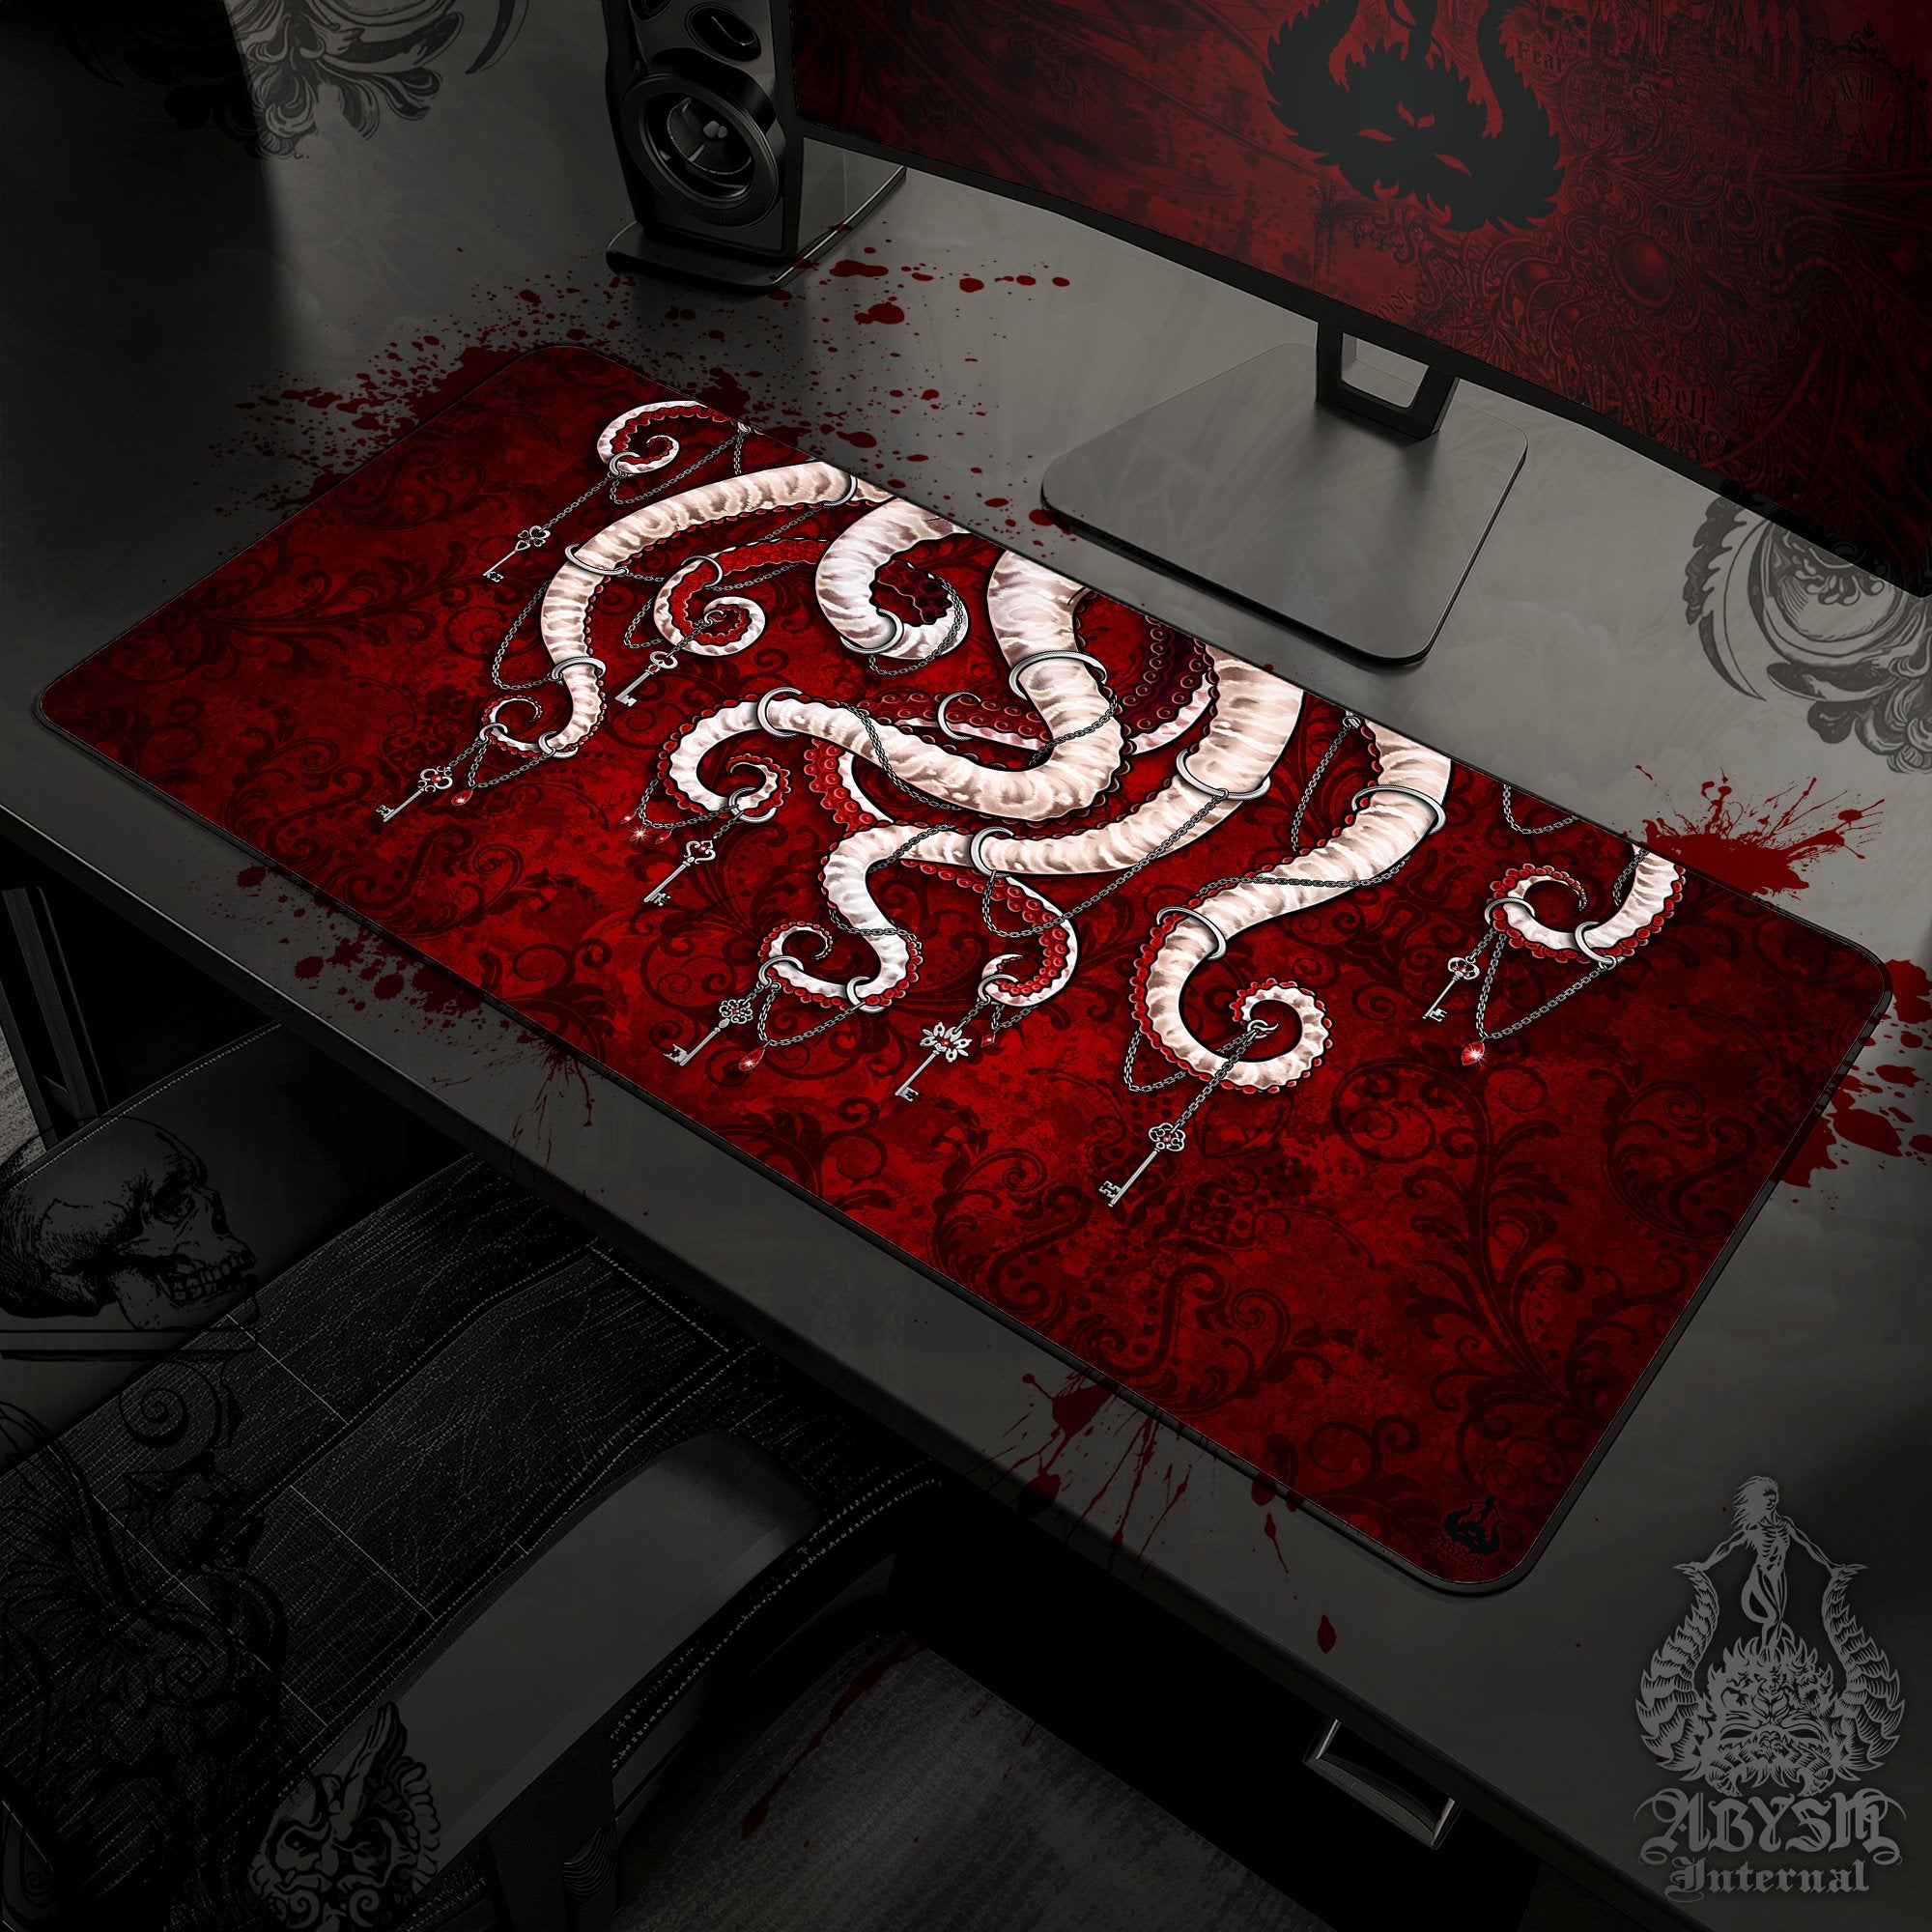 Gothic Mouse Pad, Octopus Gaming Desk Mat, White Tentacles Workpad, Bloody Goth Table Protector Cover, Fantasy Art Print - Red - Abysm Internal